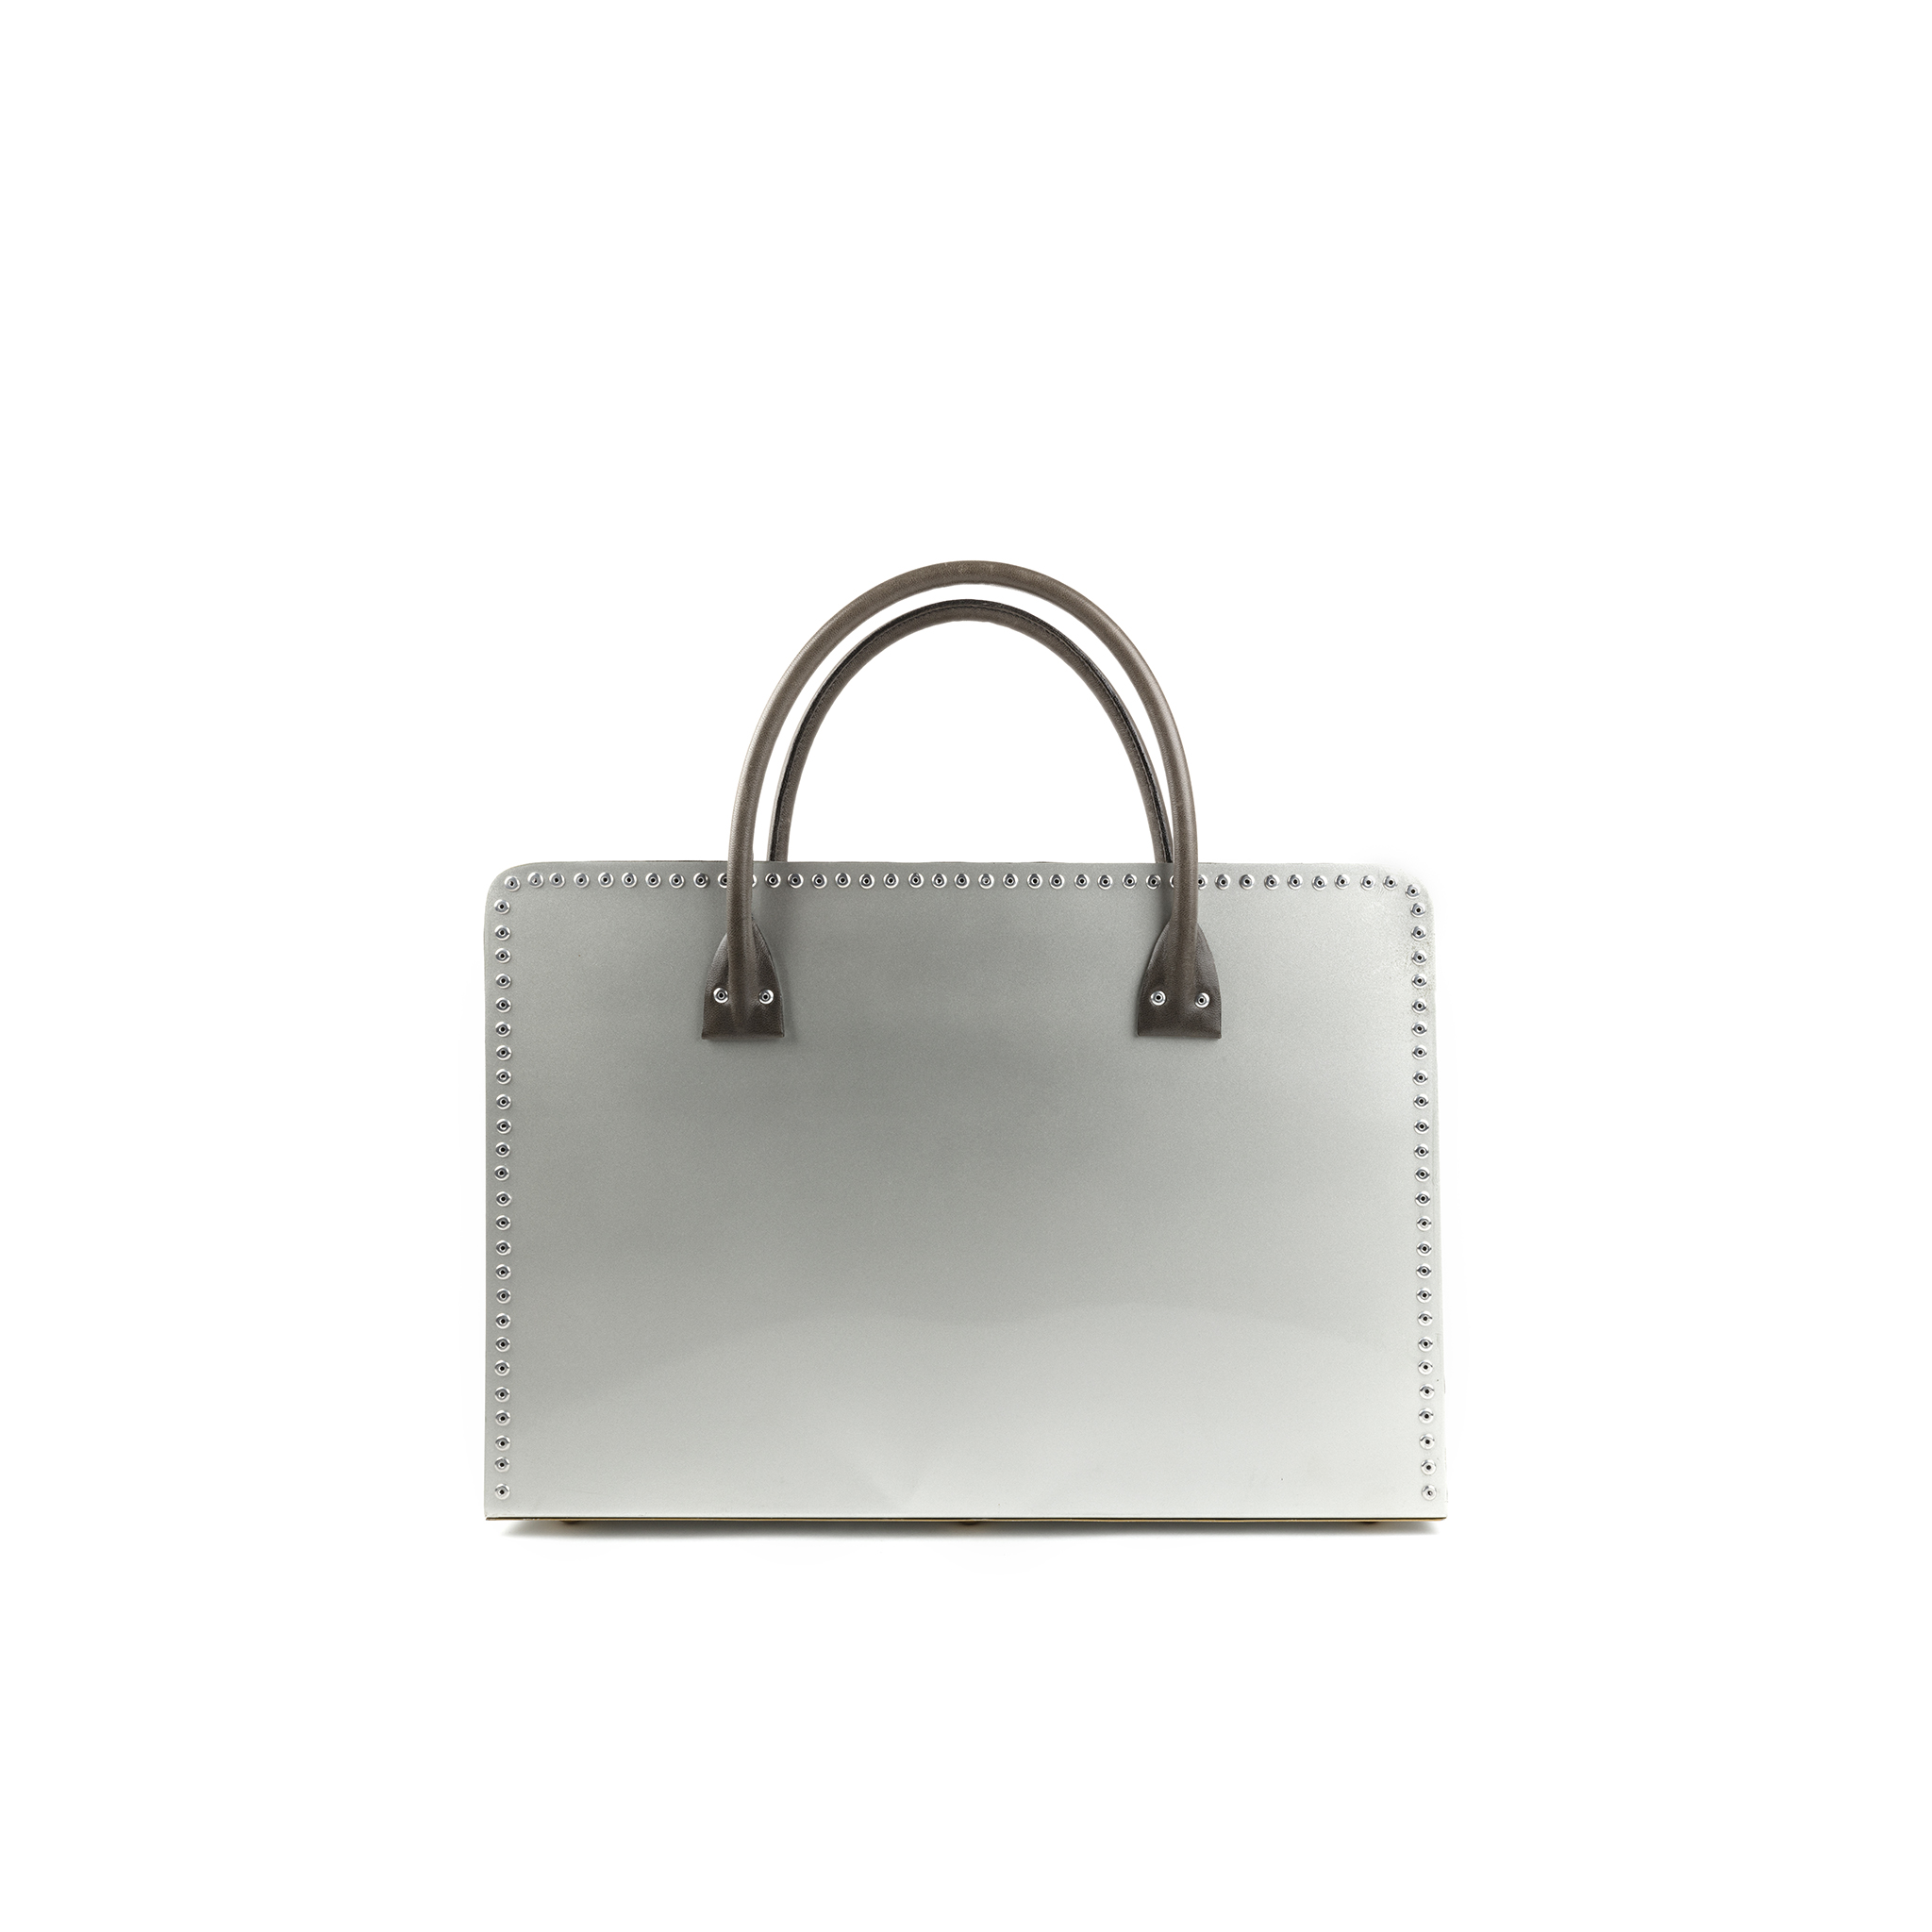 Carpart Briefcase - Aluminium and glossy leather